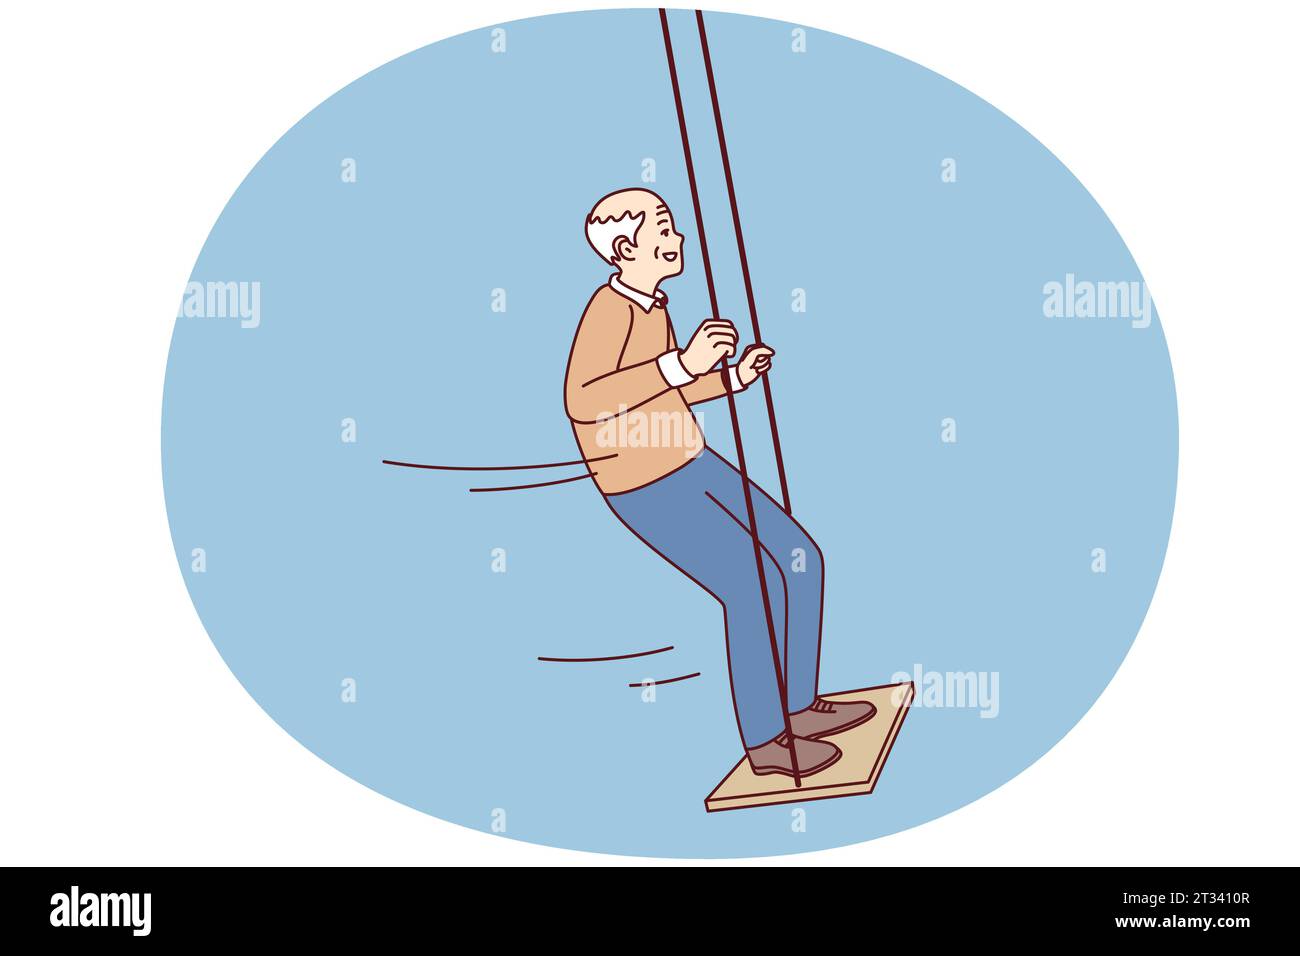 Happy energetic old man have fun on swing enjoy maturity. Smiling mature grandfather swinging outdoors show activity and energy on pension. Vector illustration. Stock Vector